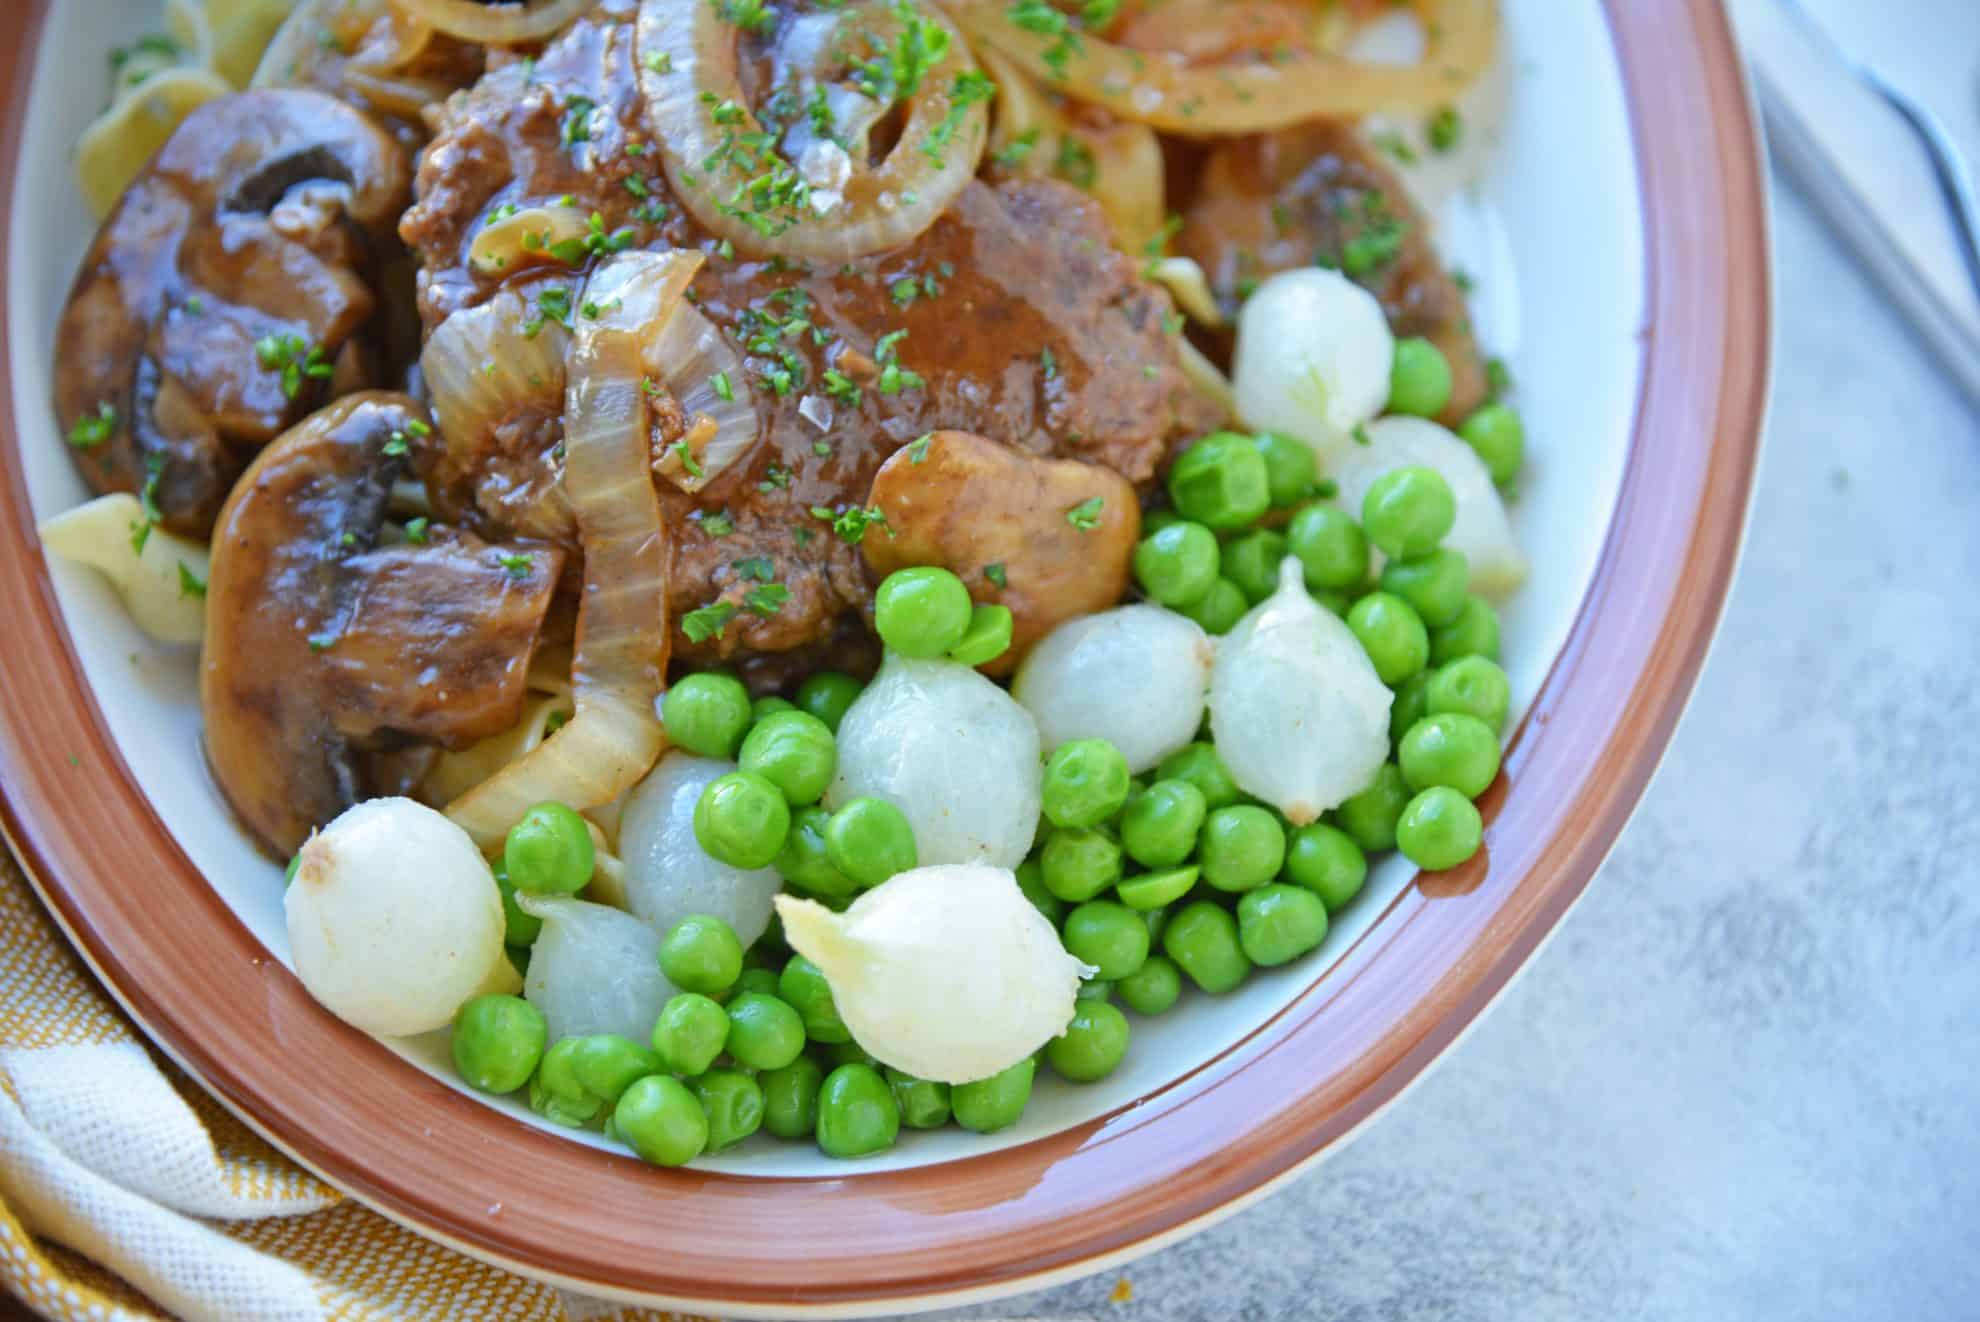 Peas and onions on a plate